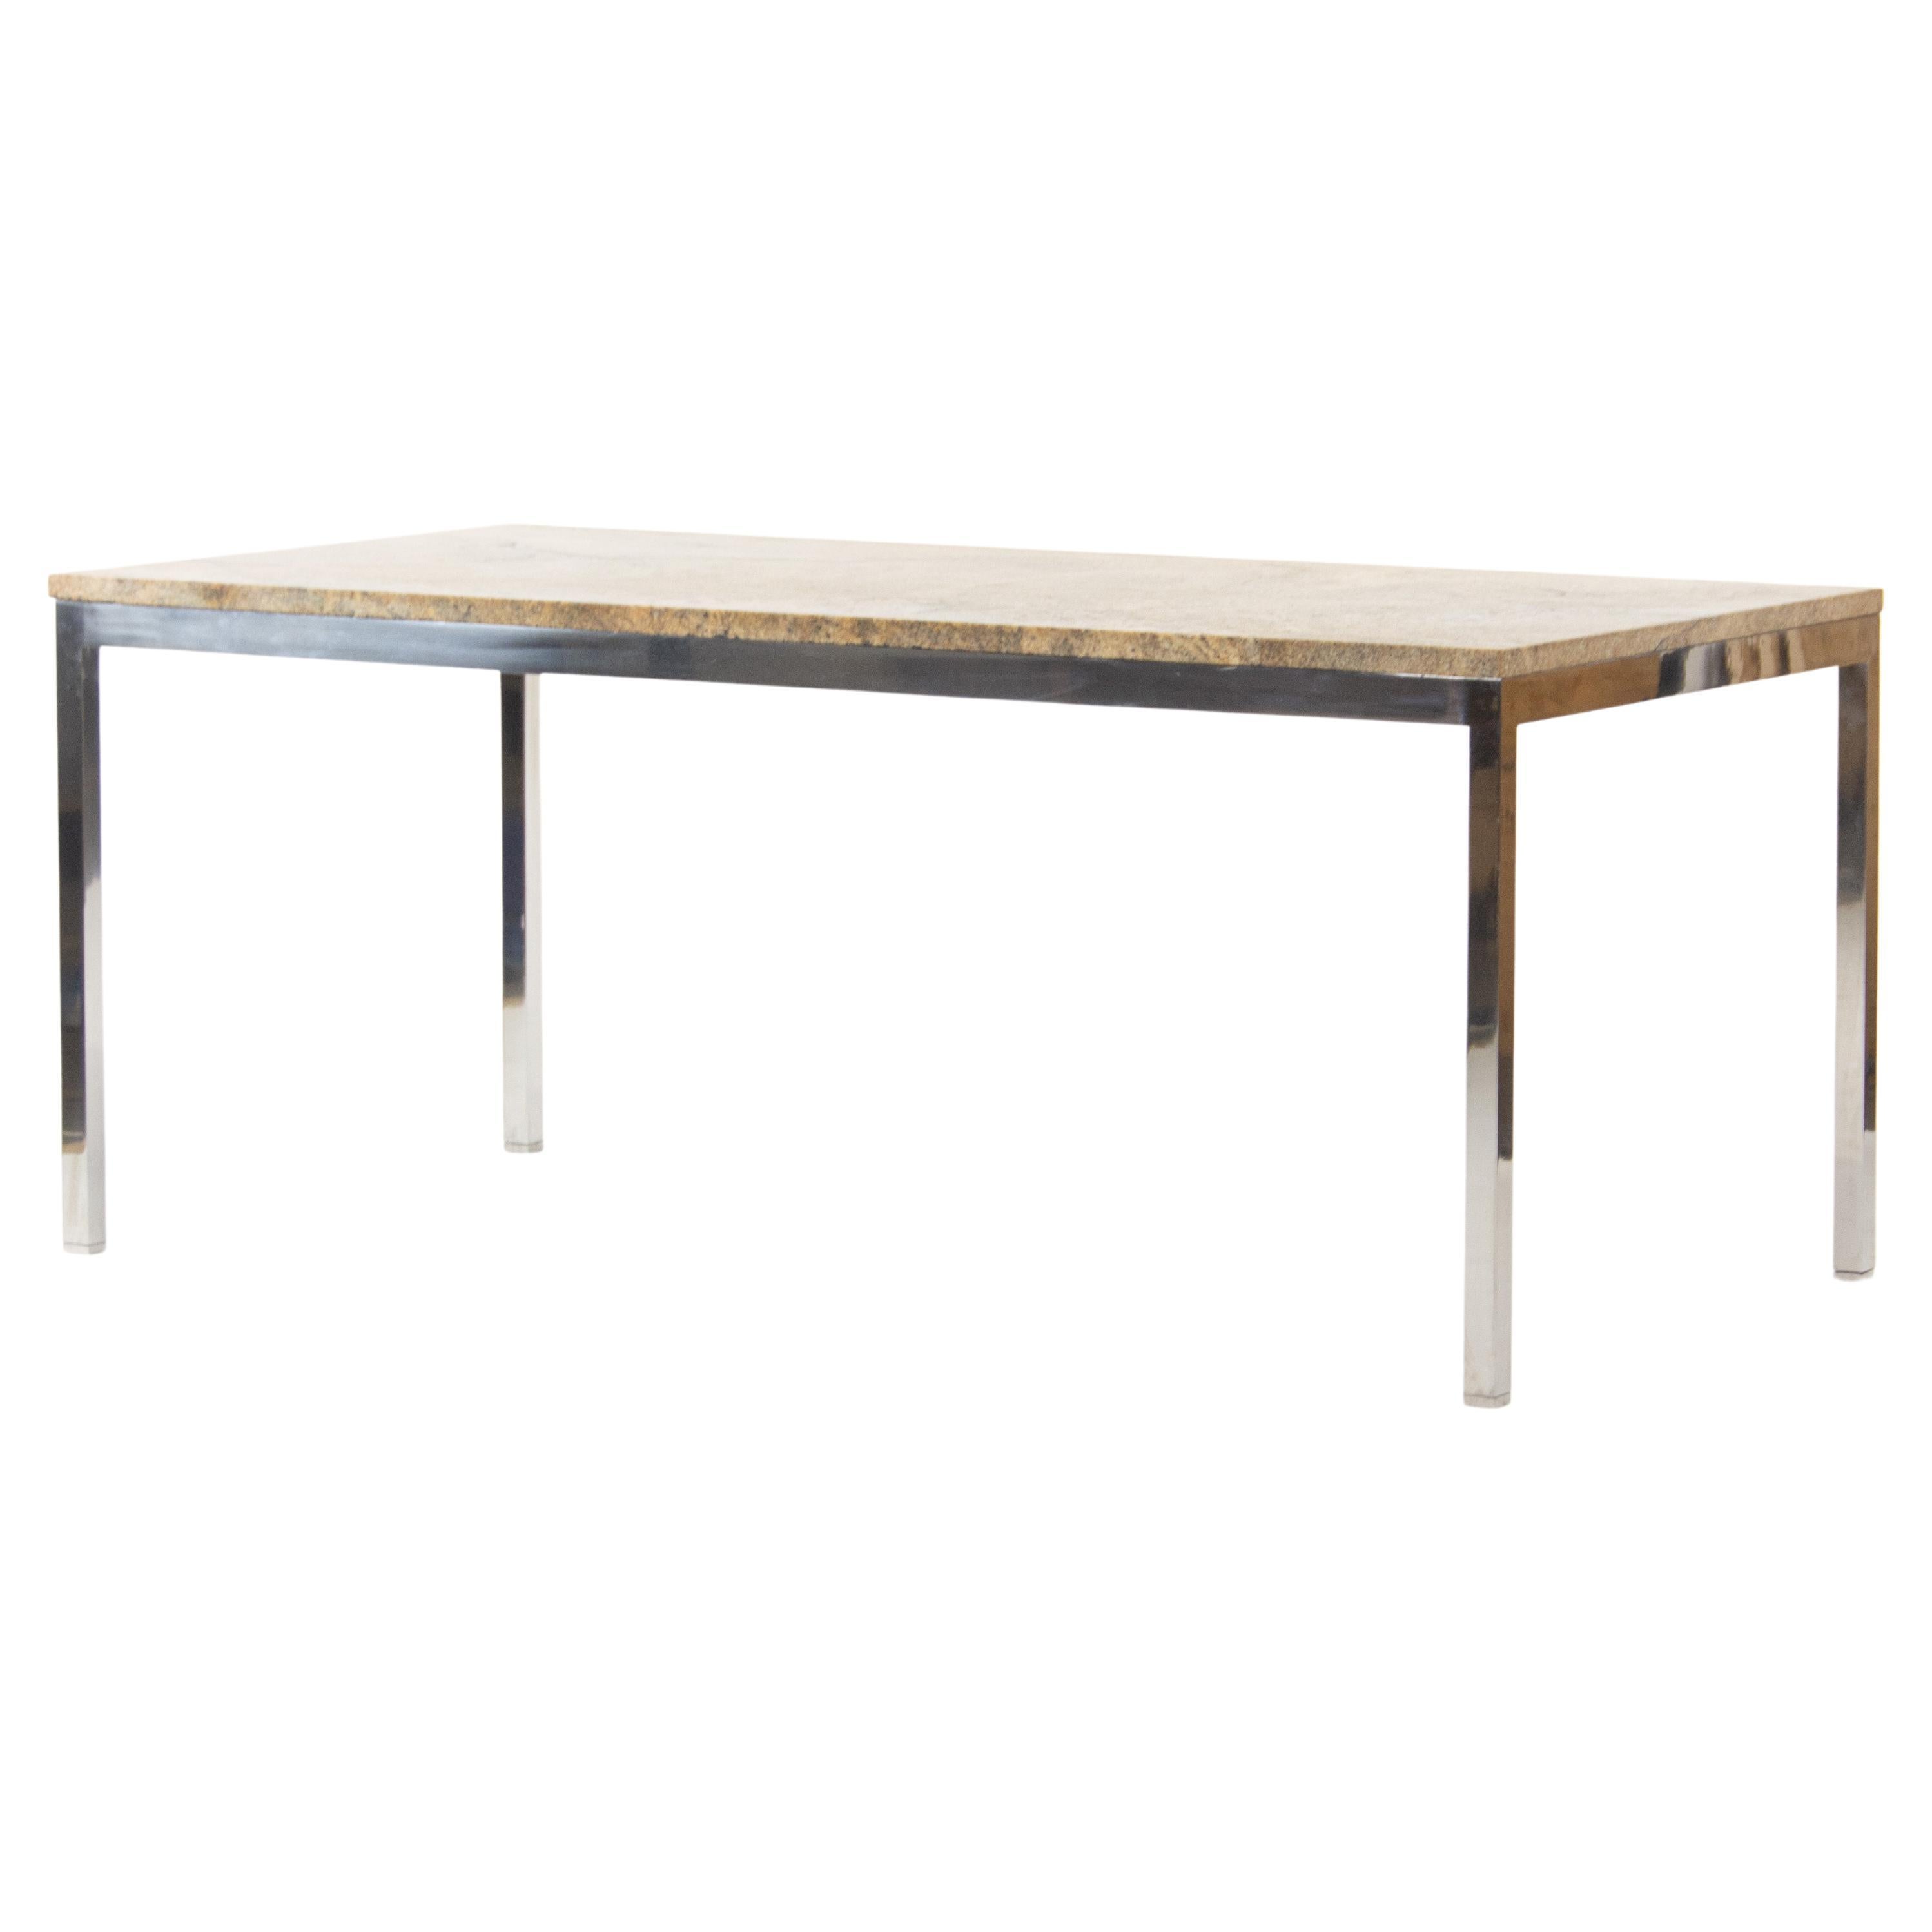 Marble 6x3 Meeting Dining Conference Table Tan w/ Steel Base from SOM Project